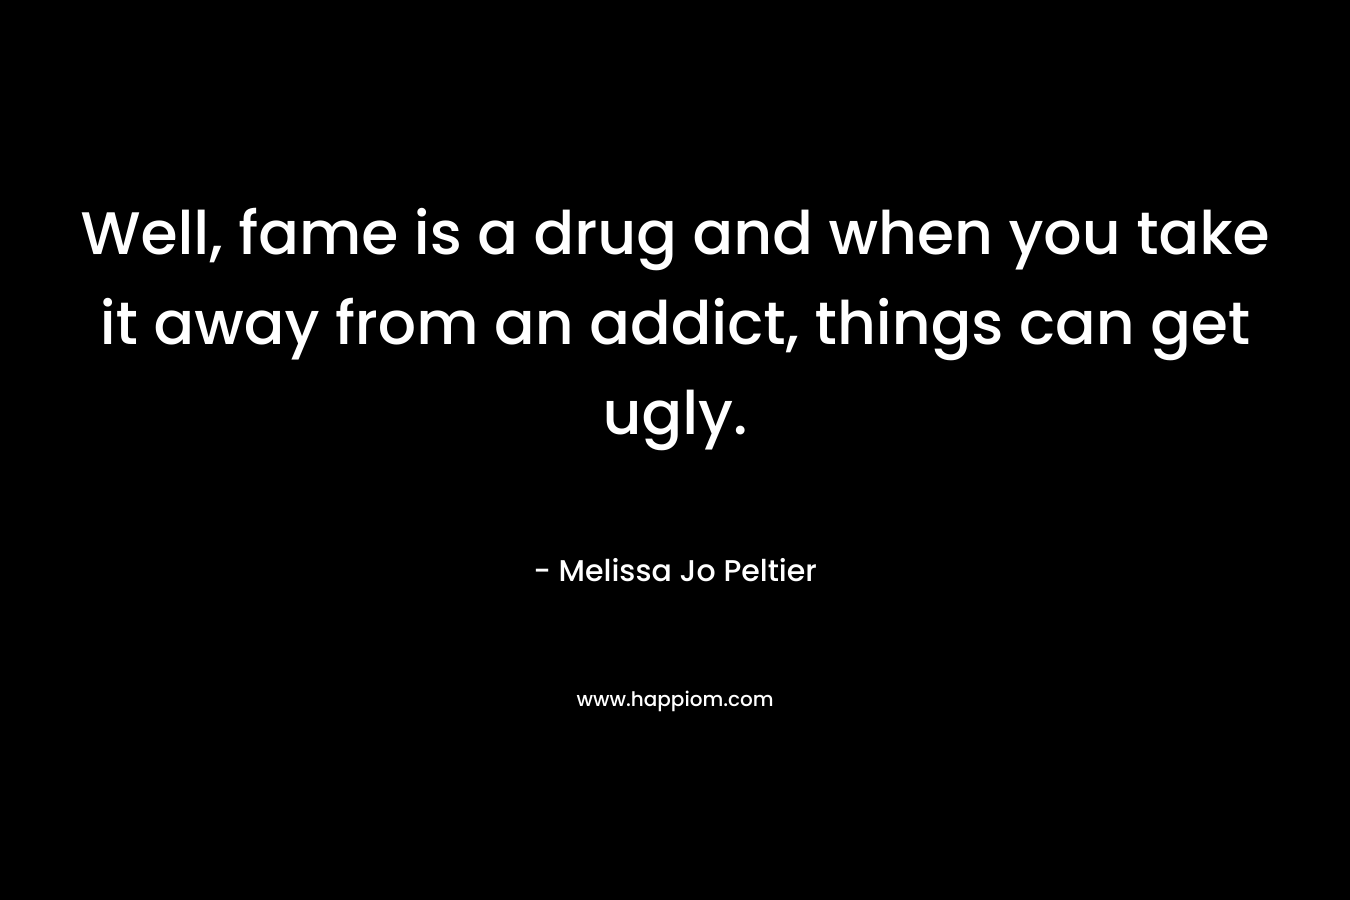 Well, fame is a drug and when you take it away from an addict, things can get ugly. – Melissa Jo Peltier